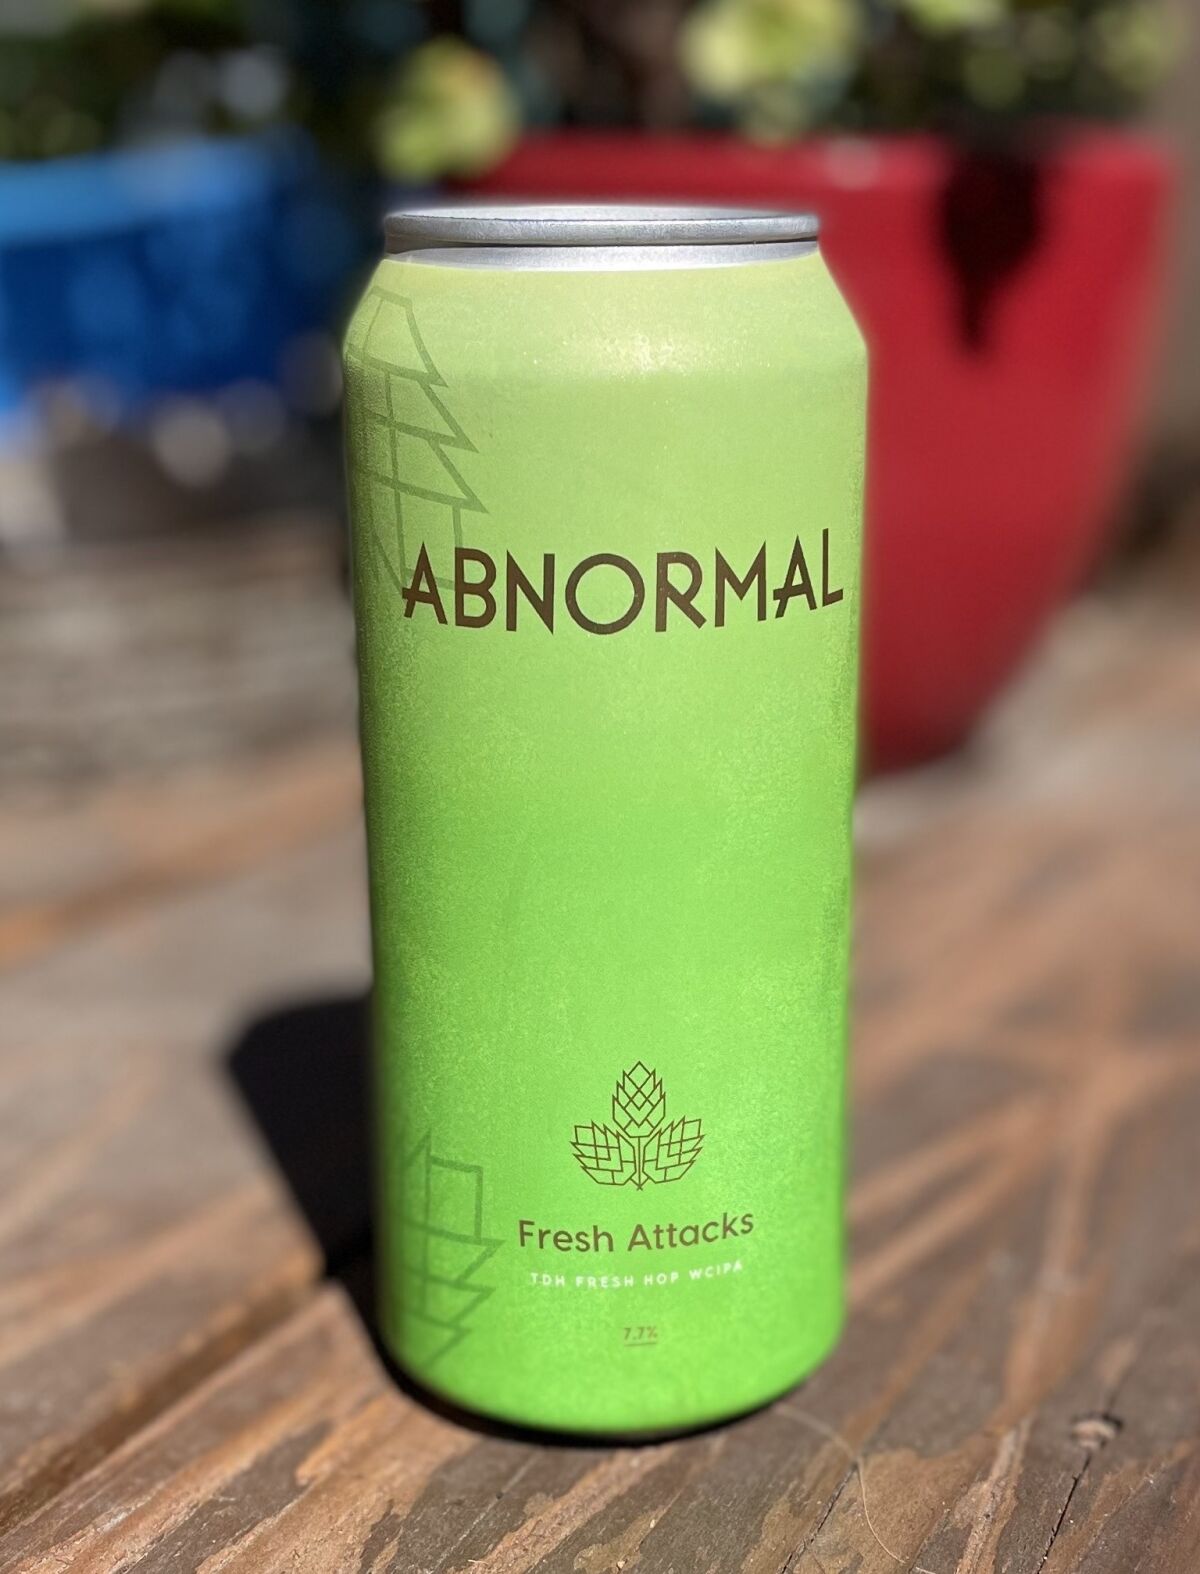 Fresh Attacks from Abnormal Beer, San Diego